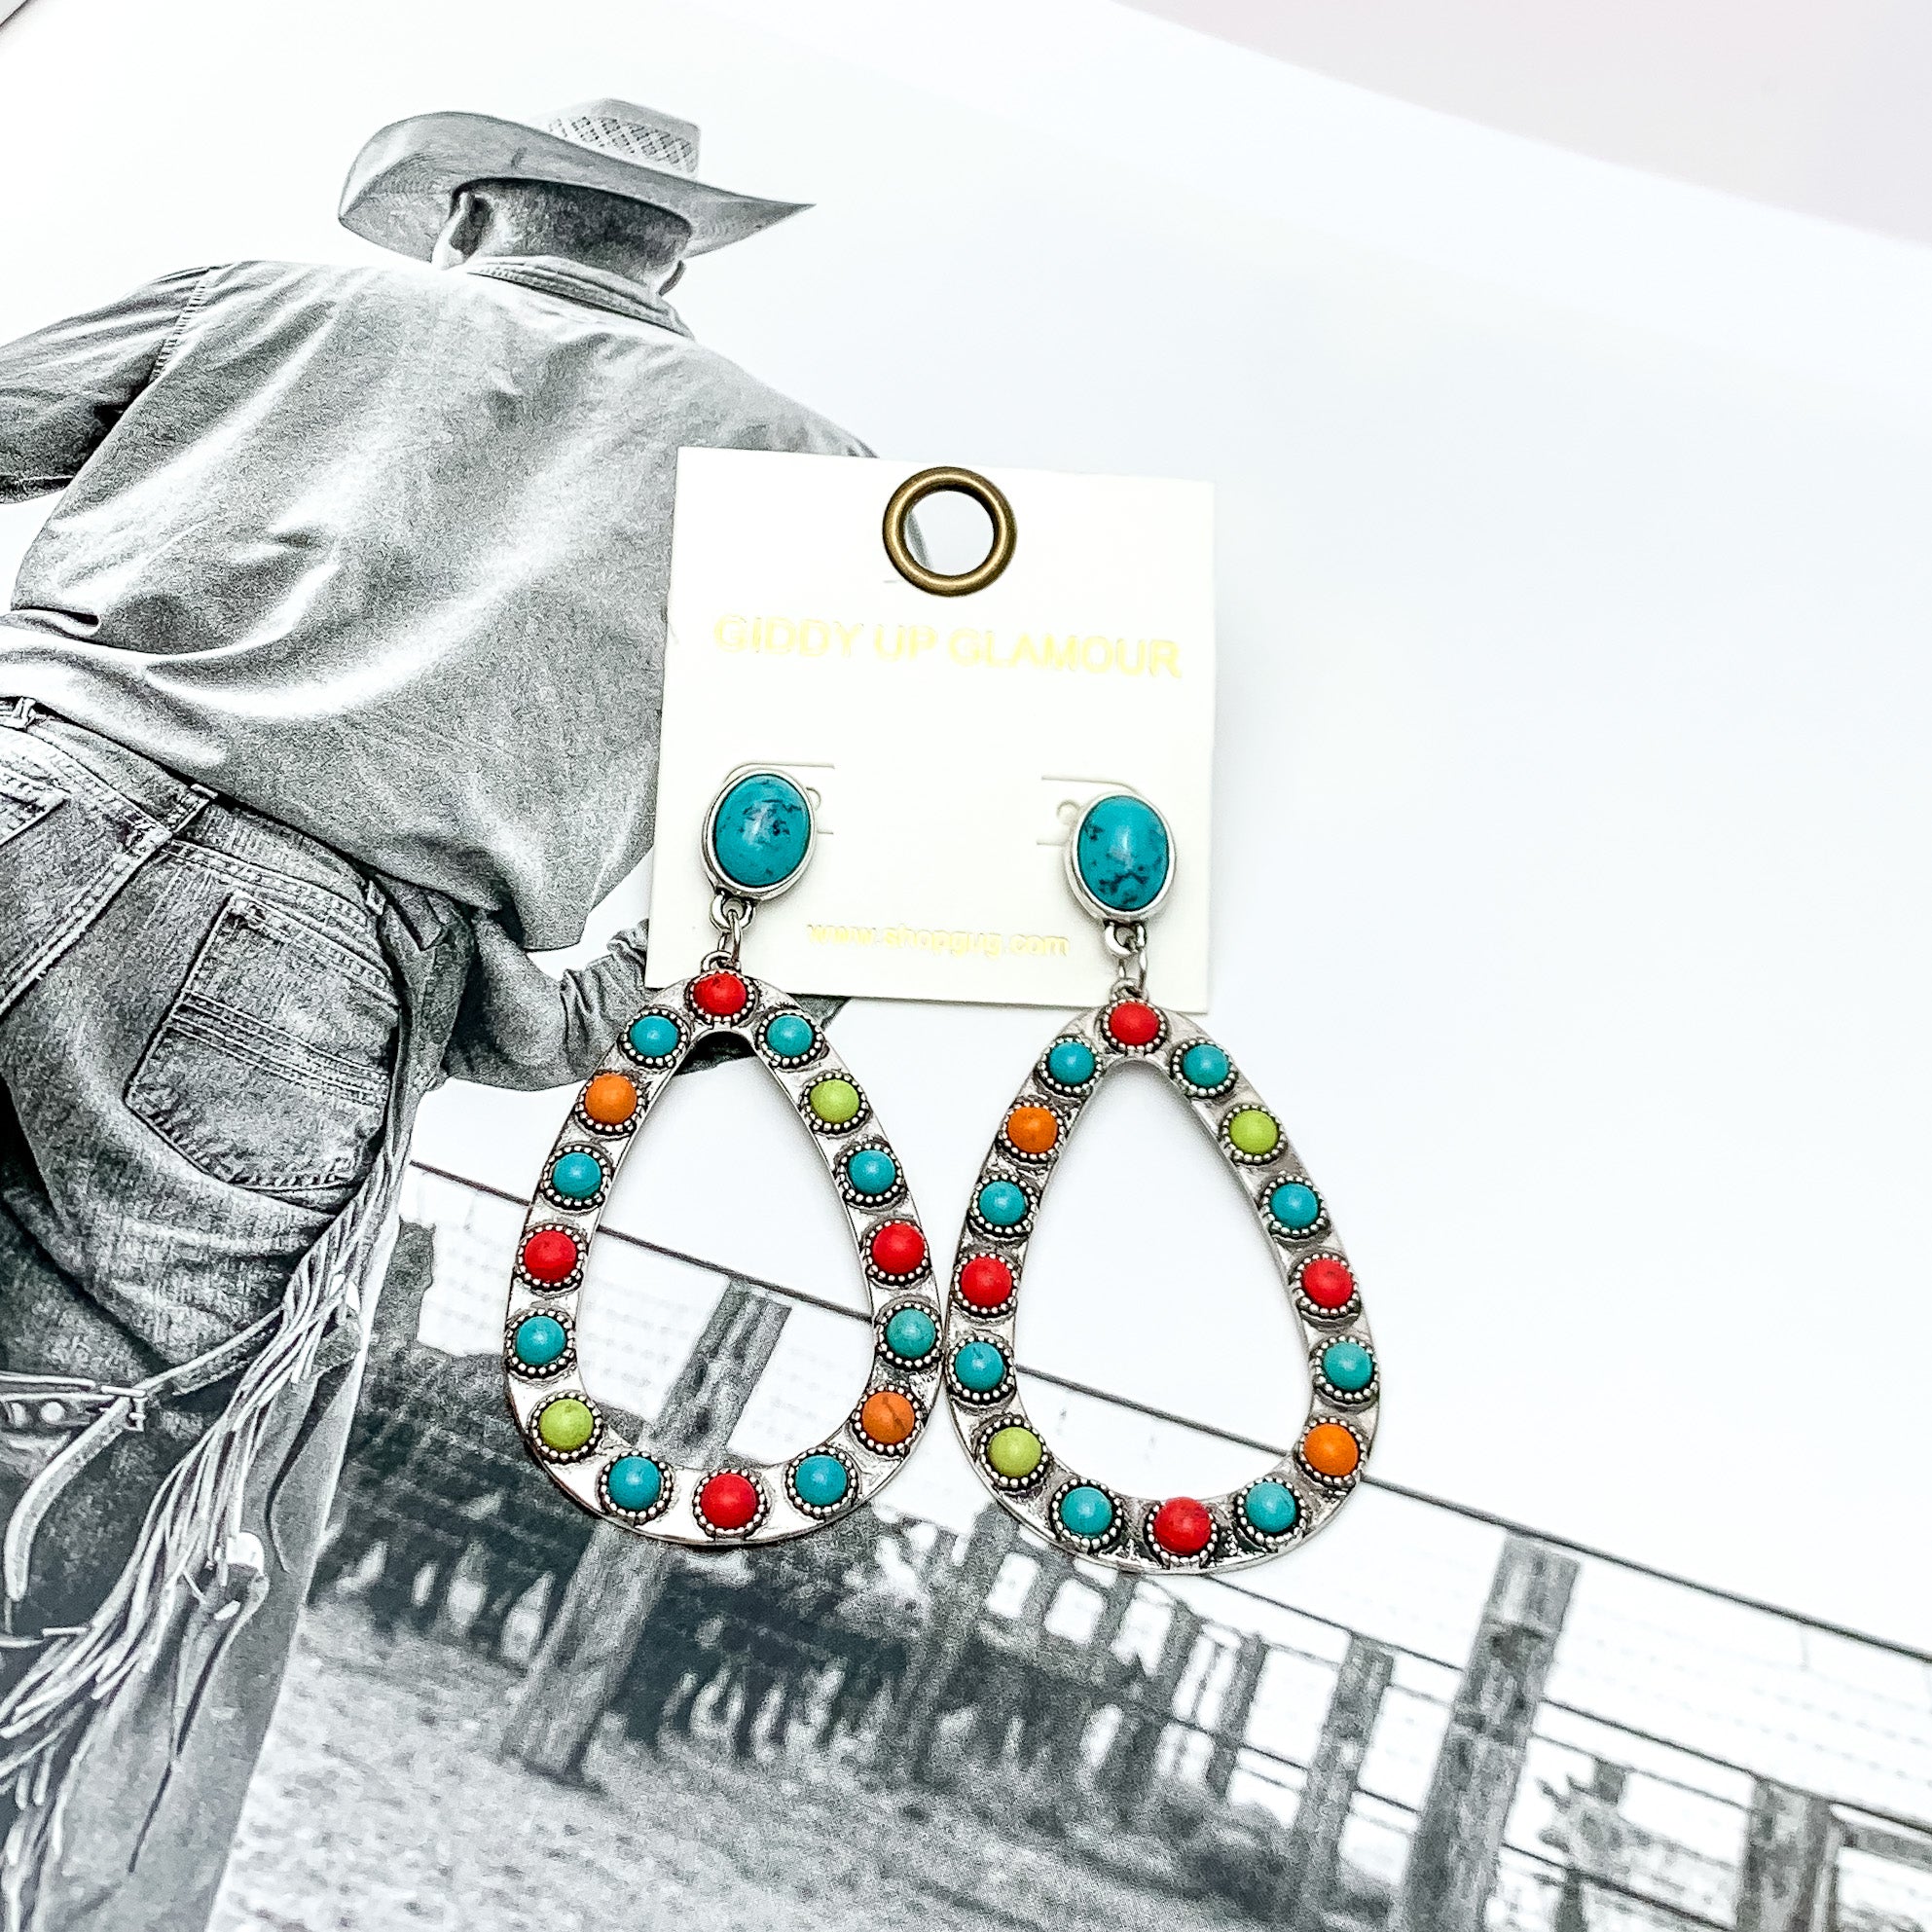 Western Open Teardrop Earrings With Stones in Multicolor. Pictured on a western background picture.